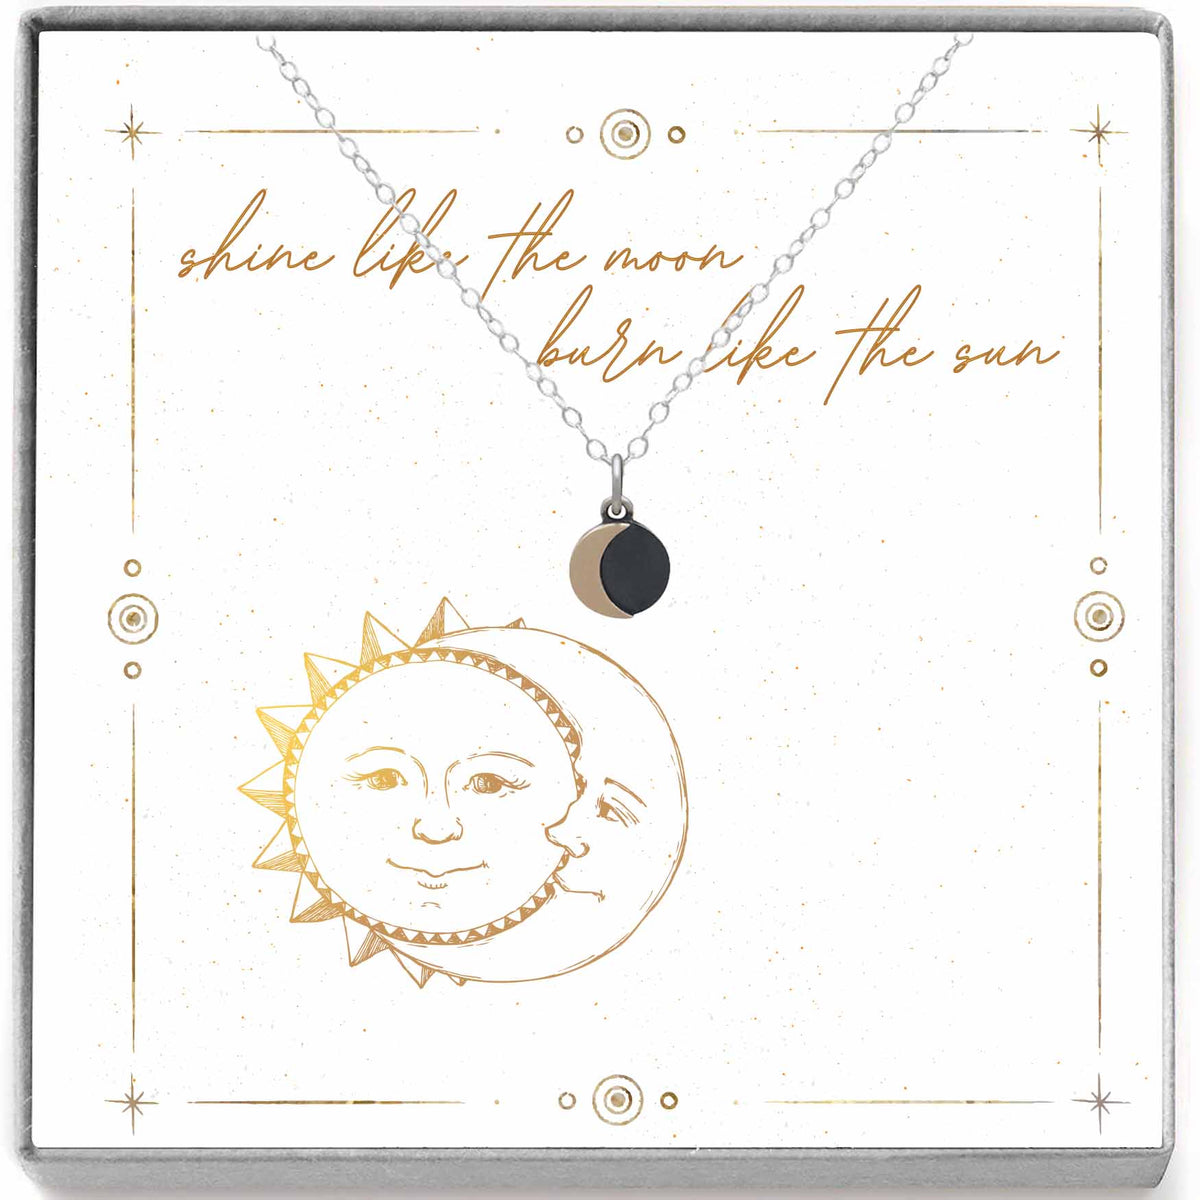 Silver and Bronze Moon Petite Charm Necklace - Love It Personalized